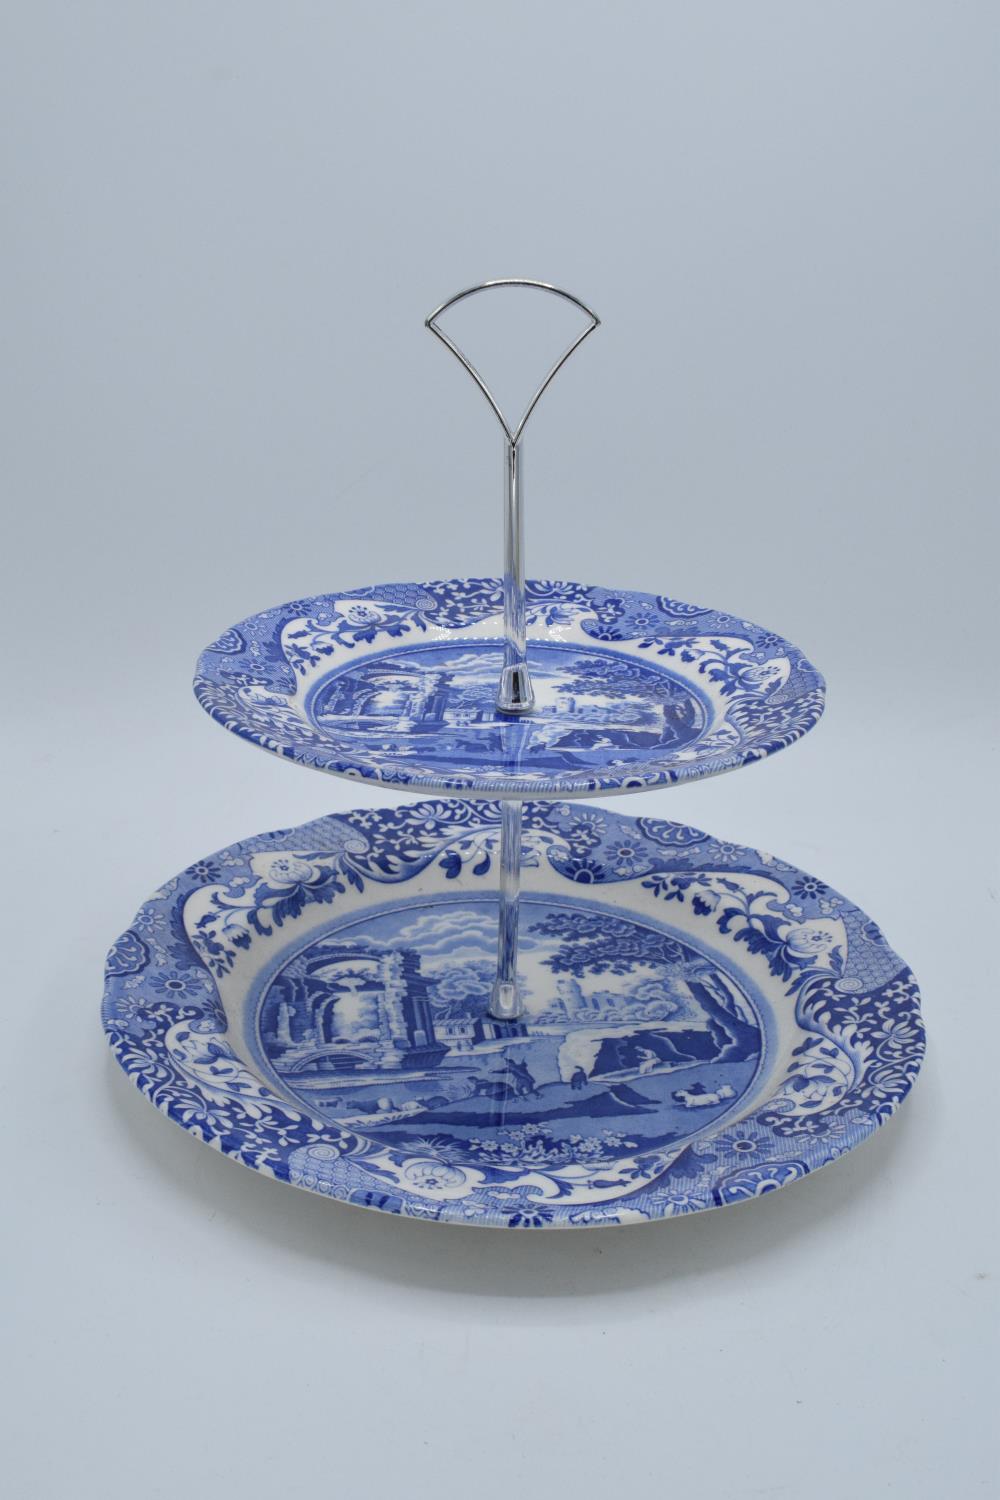 Spode Blue Italian 2 tier cakestand. In good condition with no obvious damage or restoration. Height - Image 2 of 3